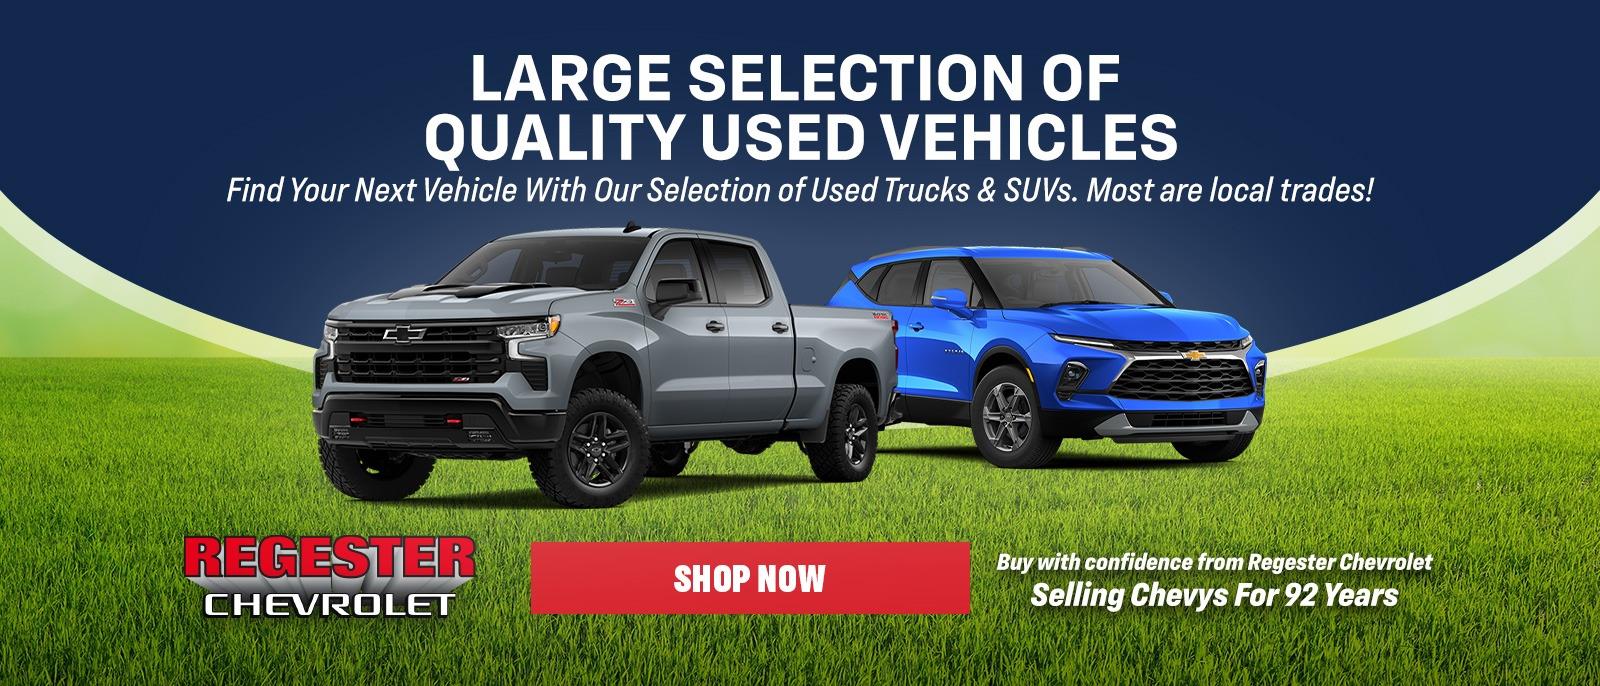 April Used Vehicles - Large Selection